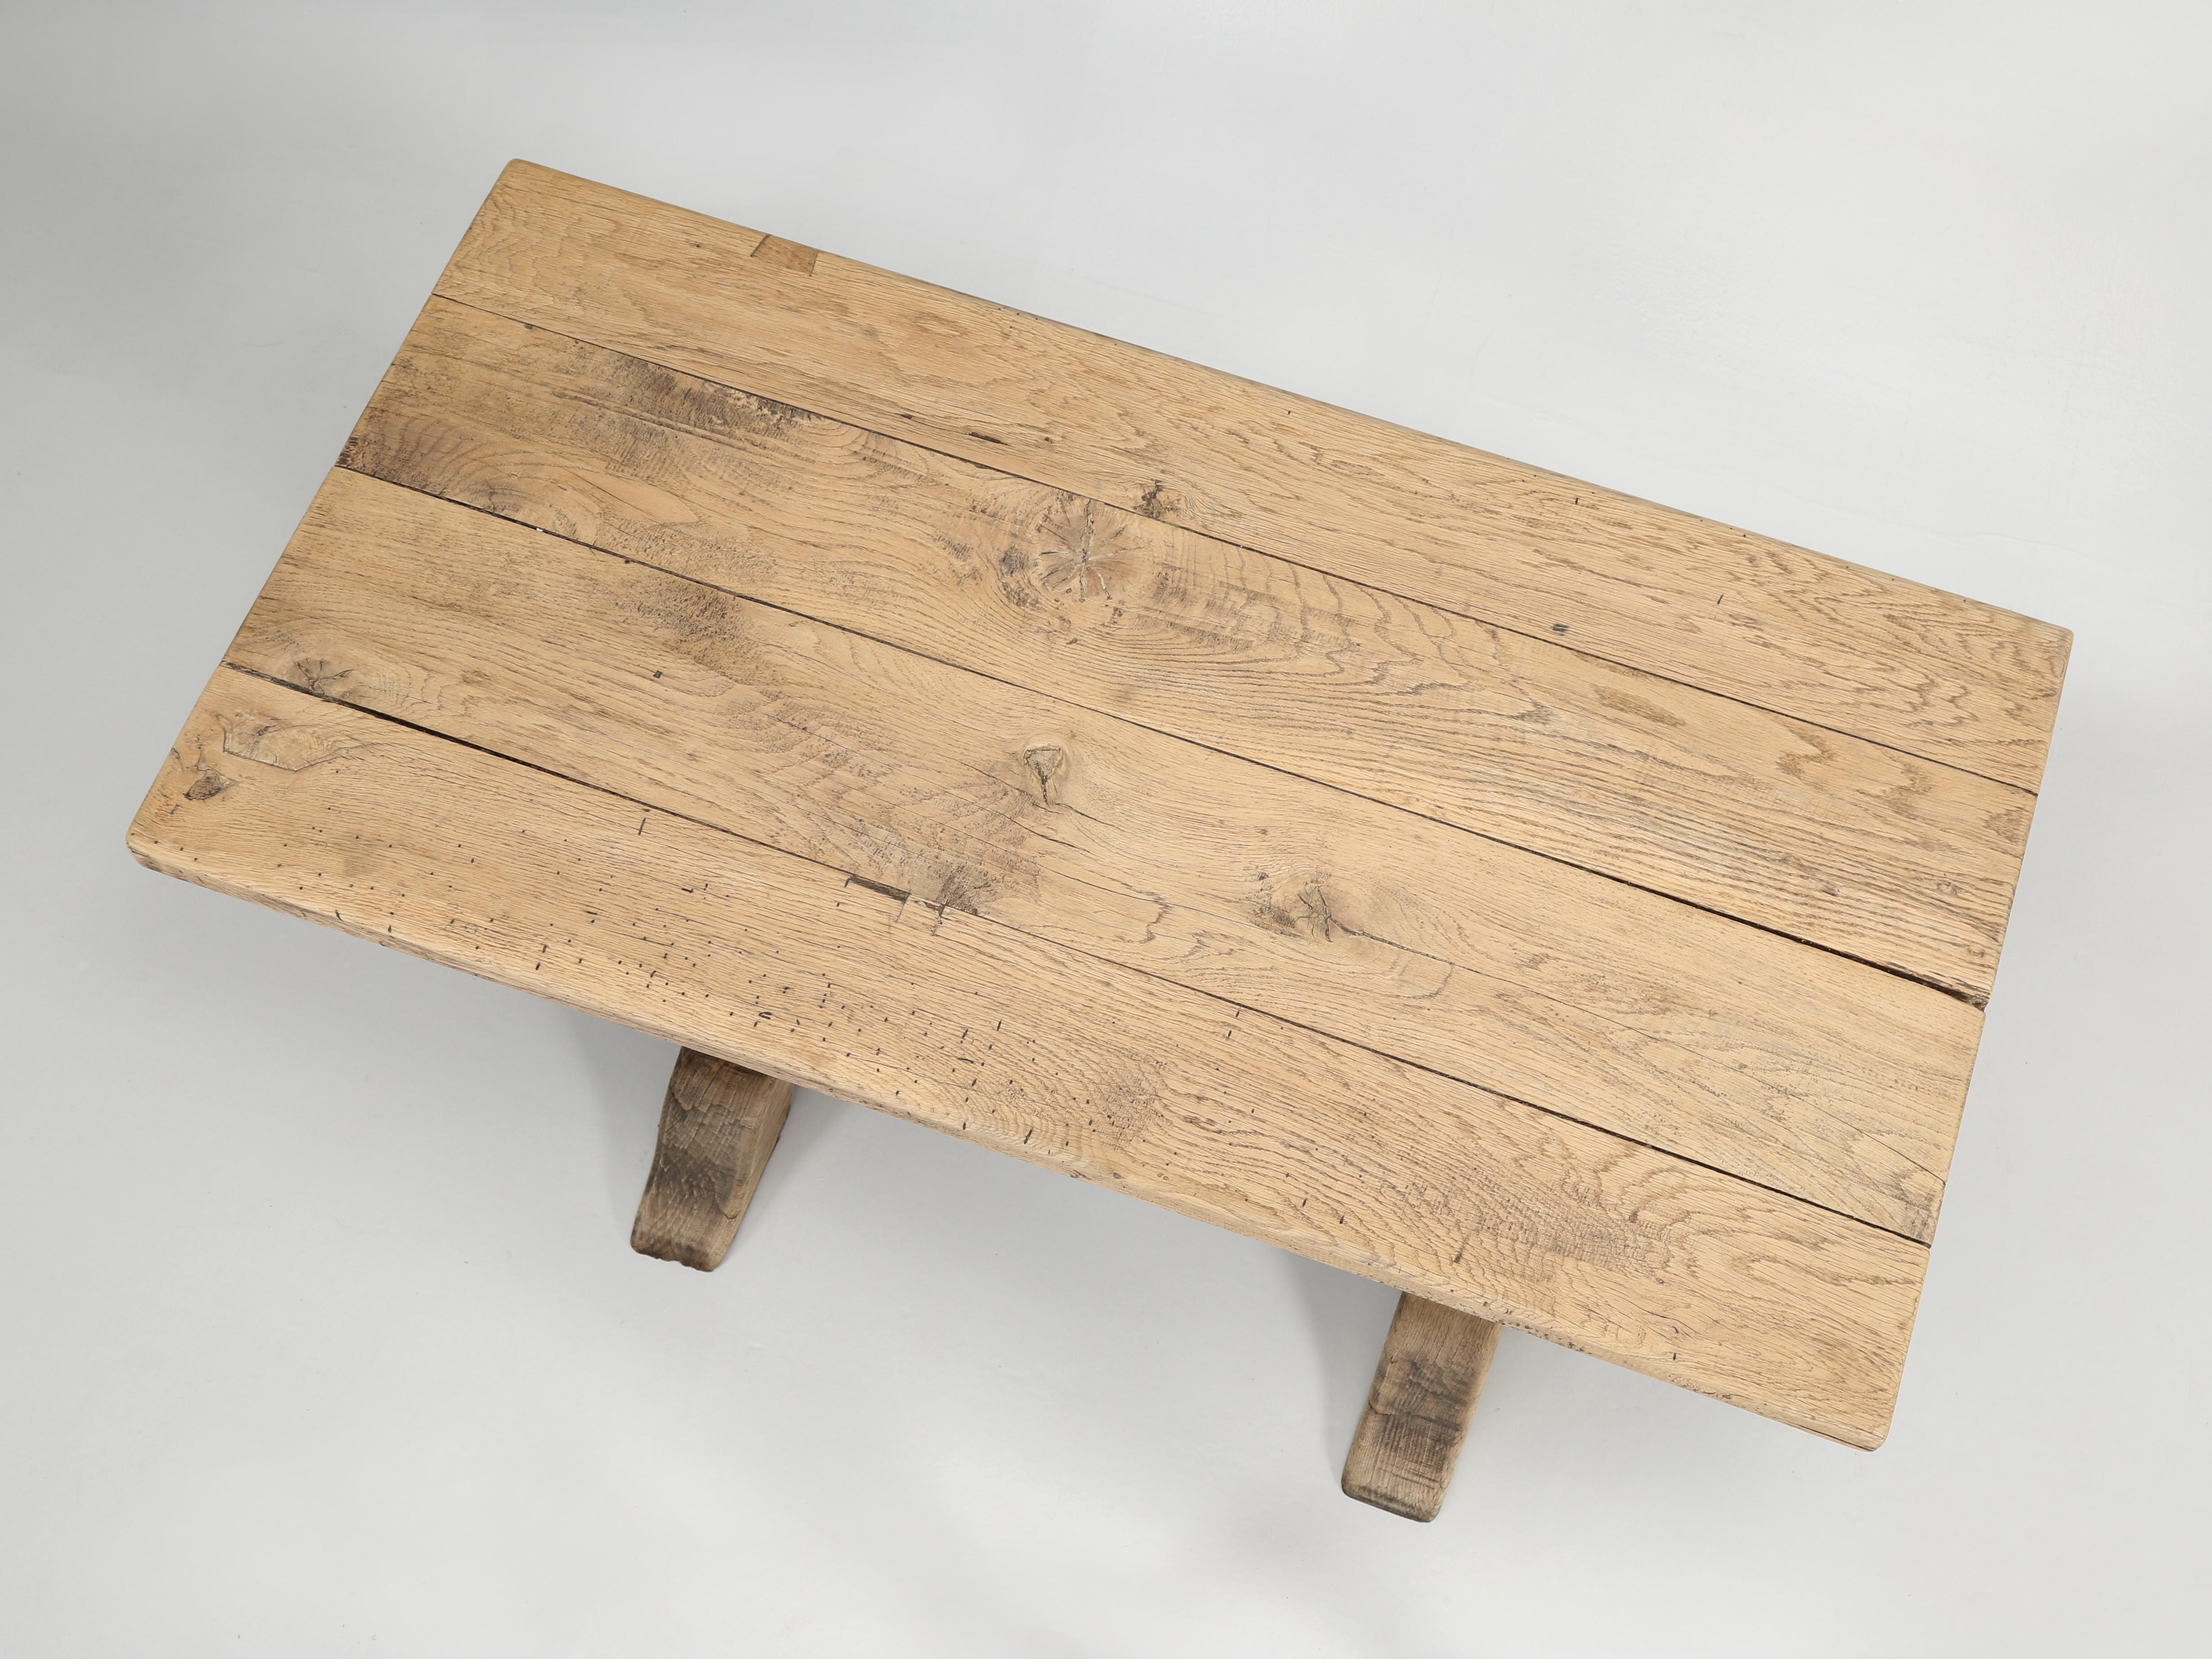 Antique French bistro table made from washed natural white oak in a classic trestle design. We have about six of these antique French petite trestle bistro tables left in stock. All of the bistro table will show wear for they have been used in a